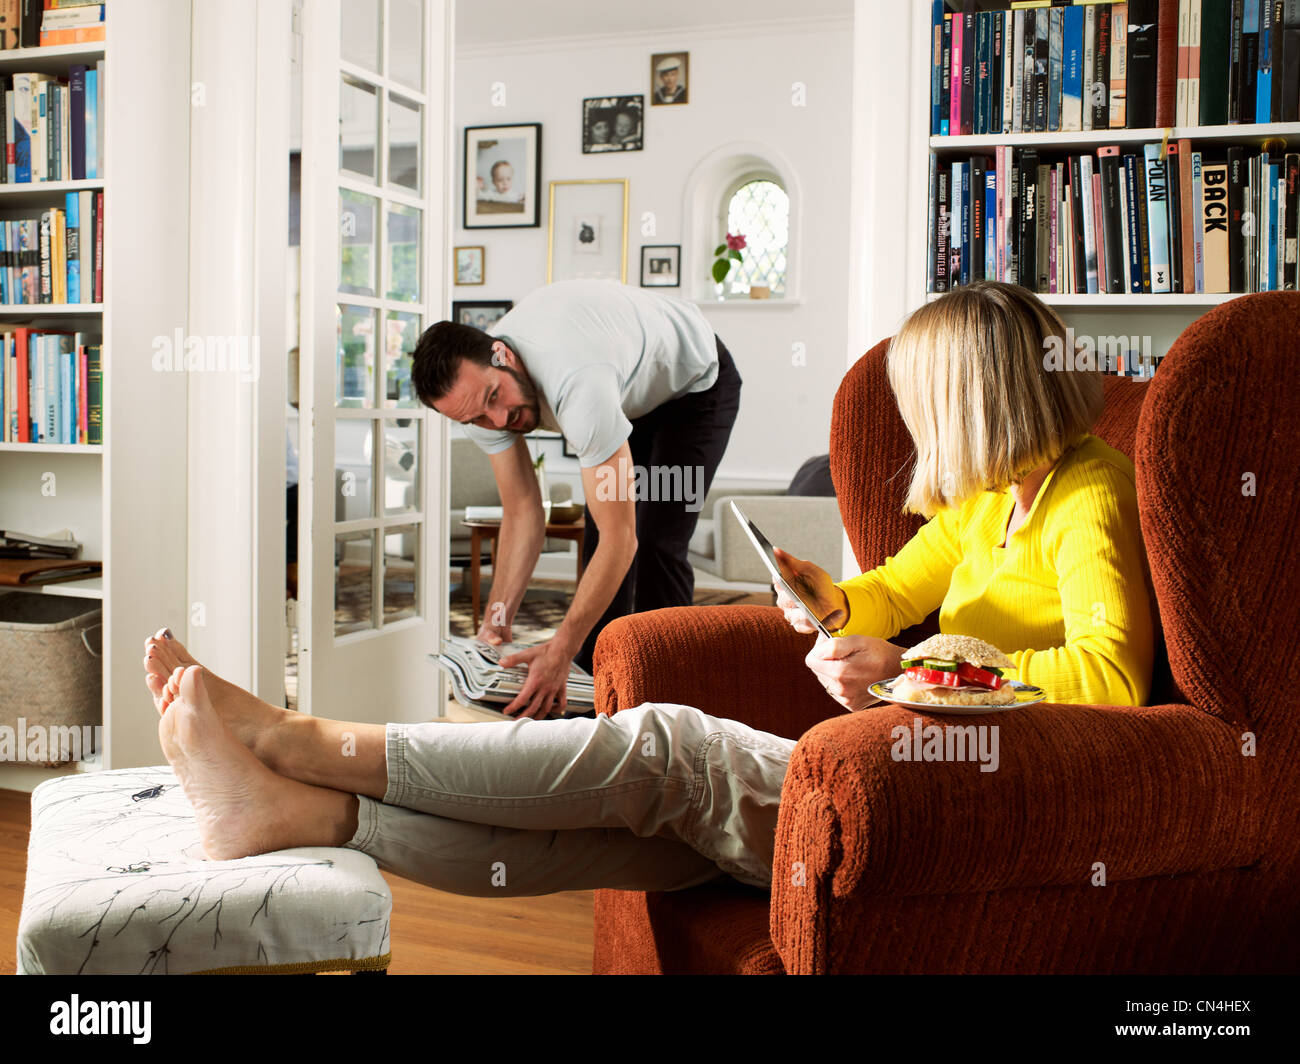 Mature man tidying as woman sits in armchair Stock Photo